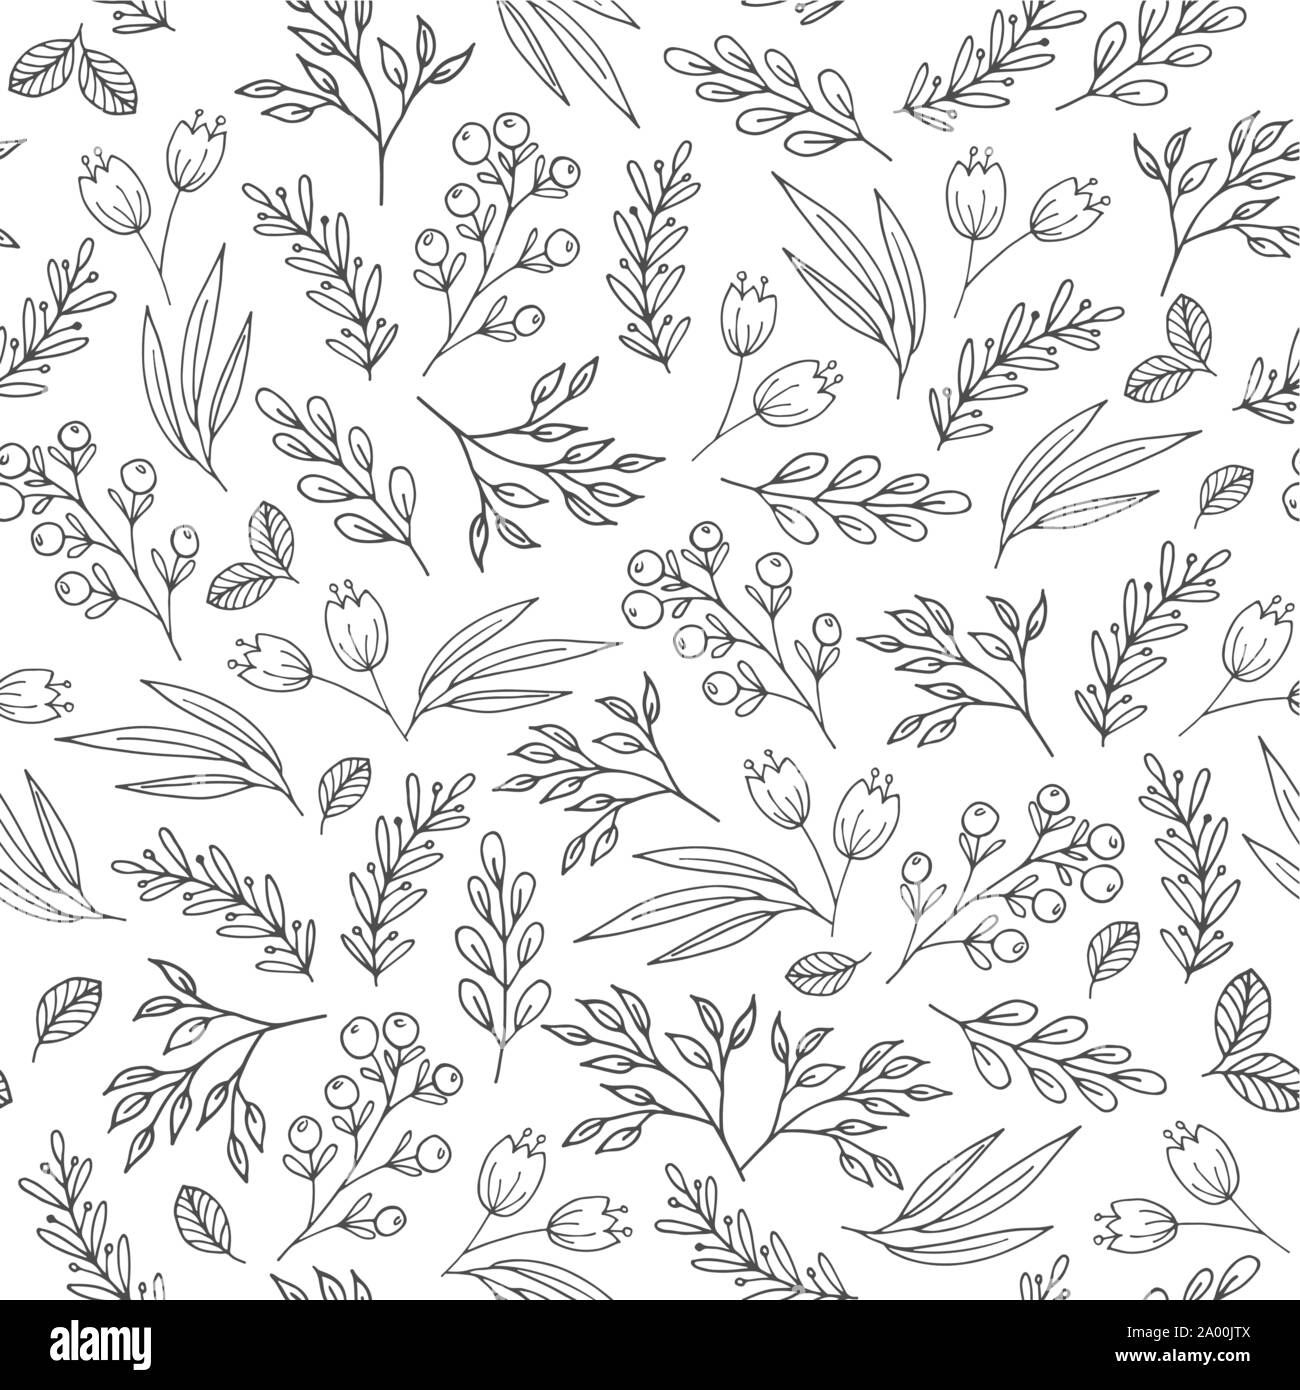 Floral seamless pattern with flowers, plants Stock Vector